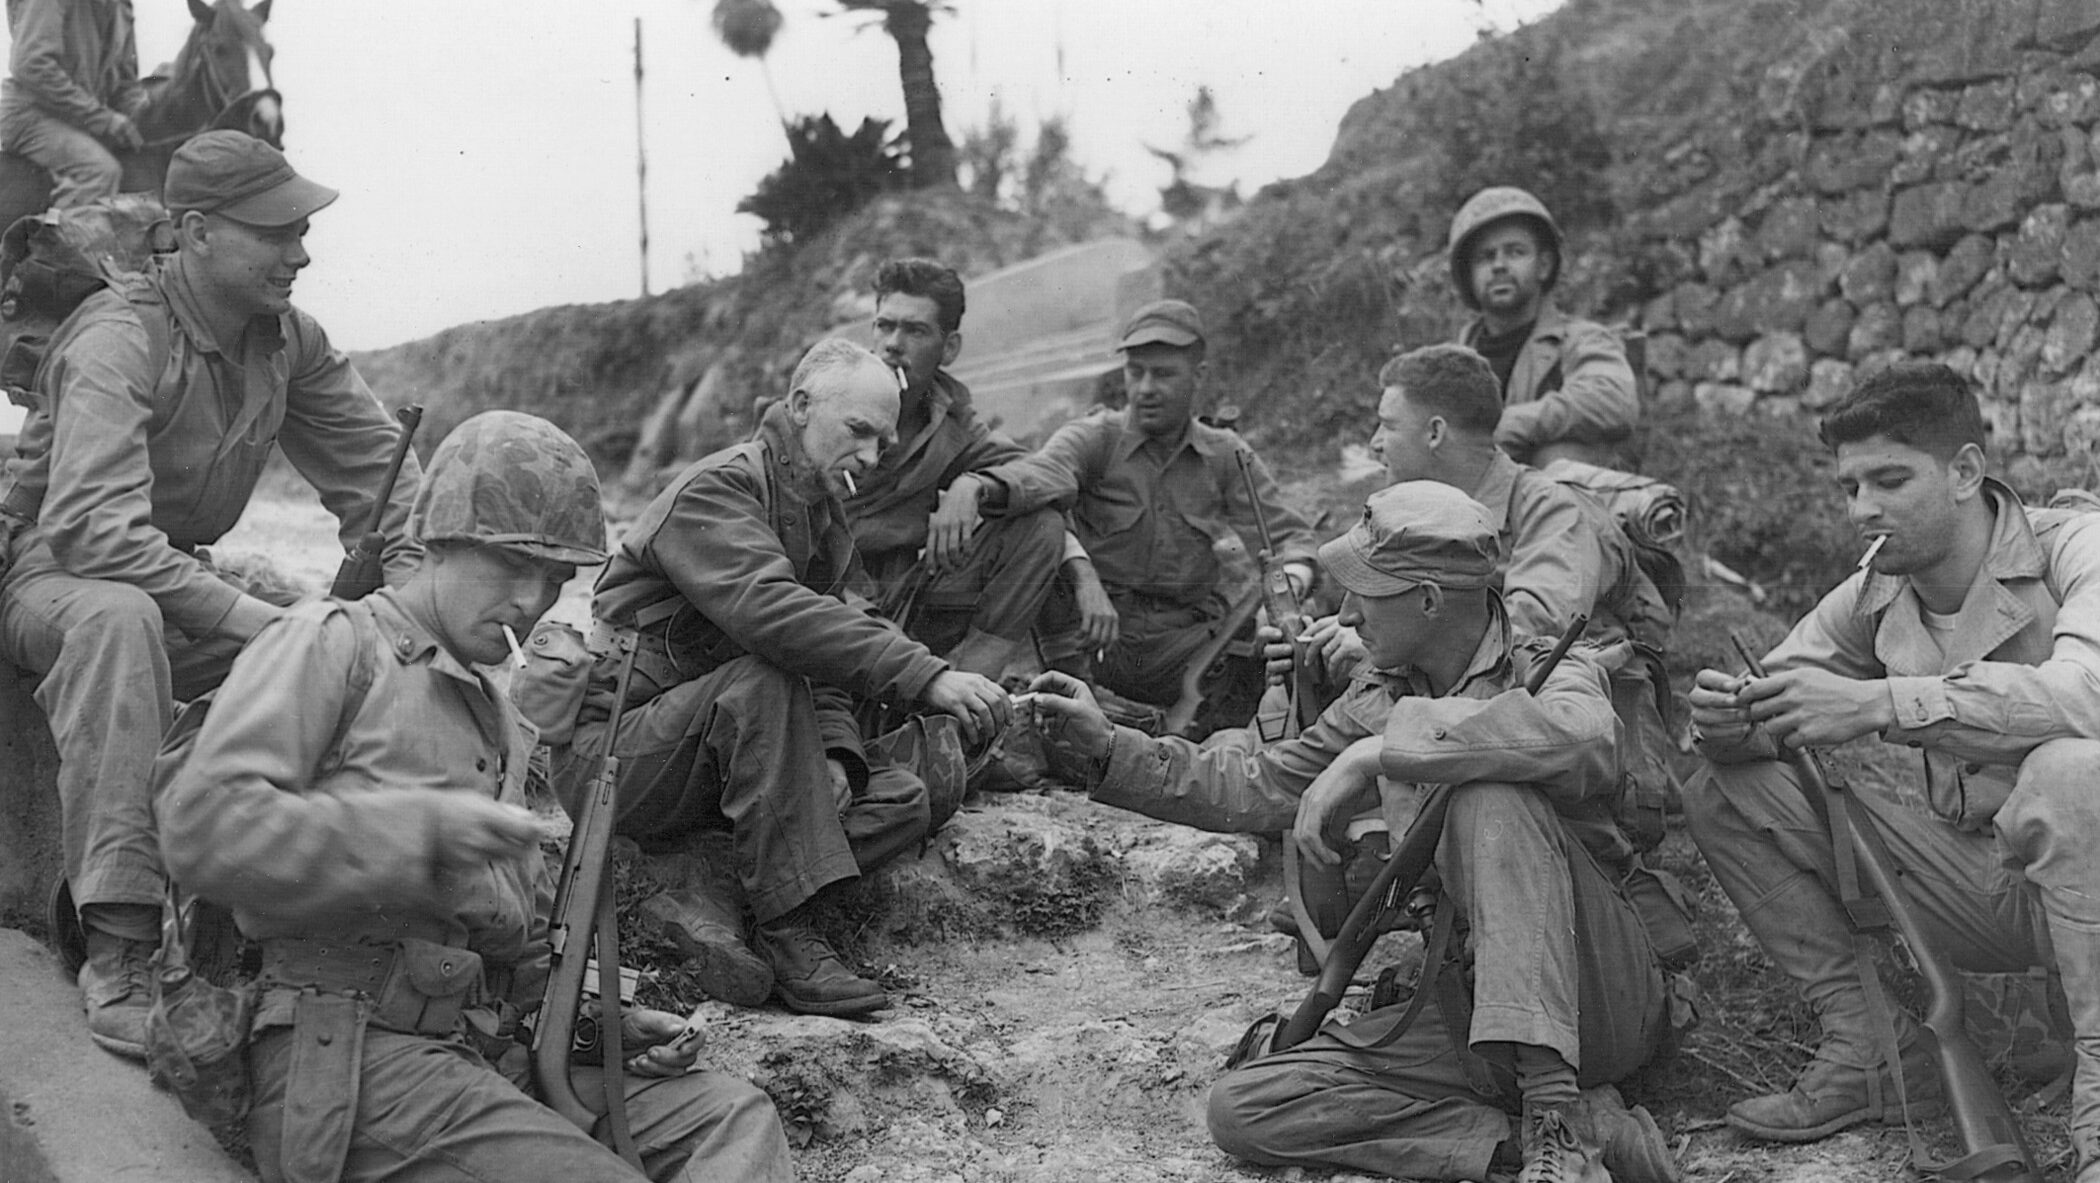 On April 18, 1945, only days before his death, famed war correspondent Ernie Pyle shares cigarettes with a group of Marines from the U.S. 1st Division on the wartorn island of Okinawa.